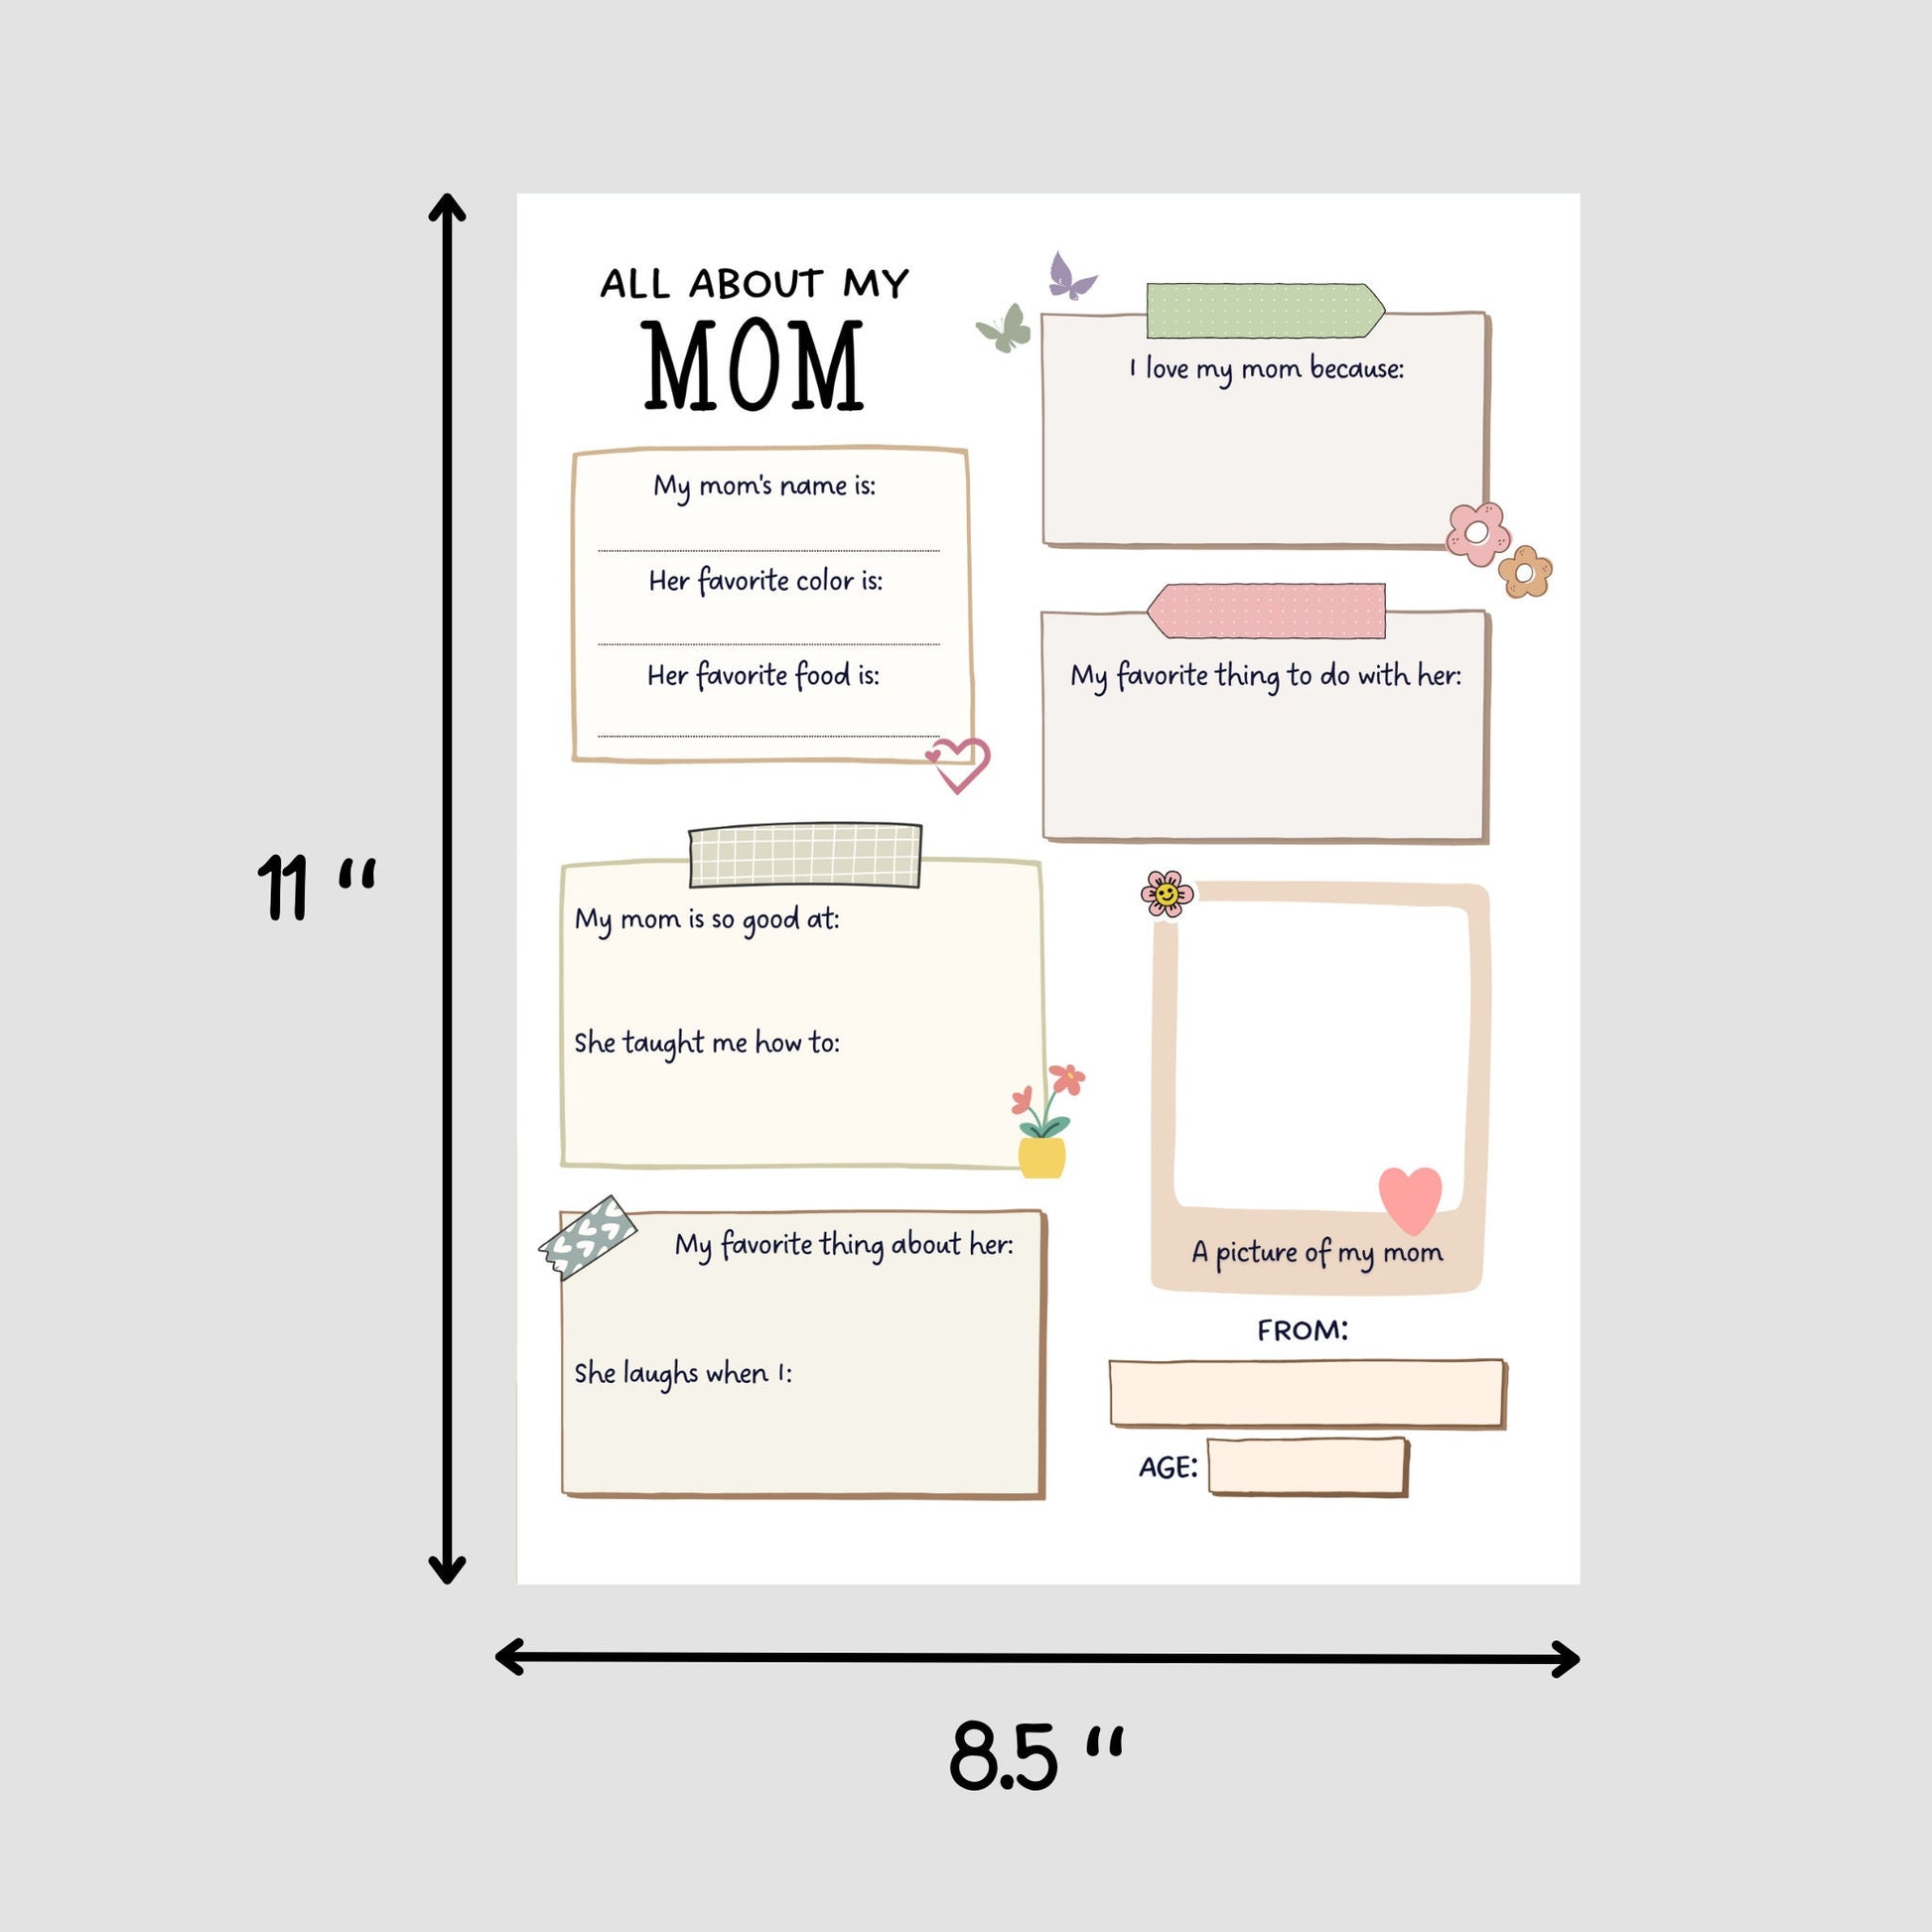 All About My Mom Survey Printable, Mothers Day Questionnaire, Mothers Day Gift Ideas For Preschool Kids, Personalized Keepsake Gift For Mom